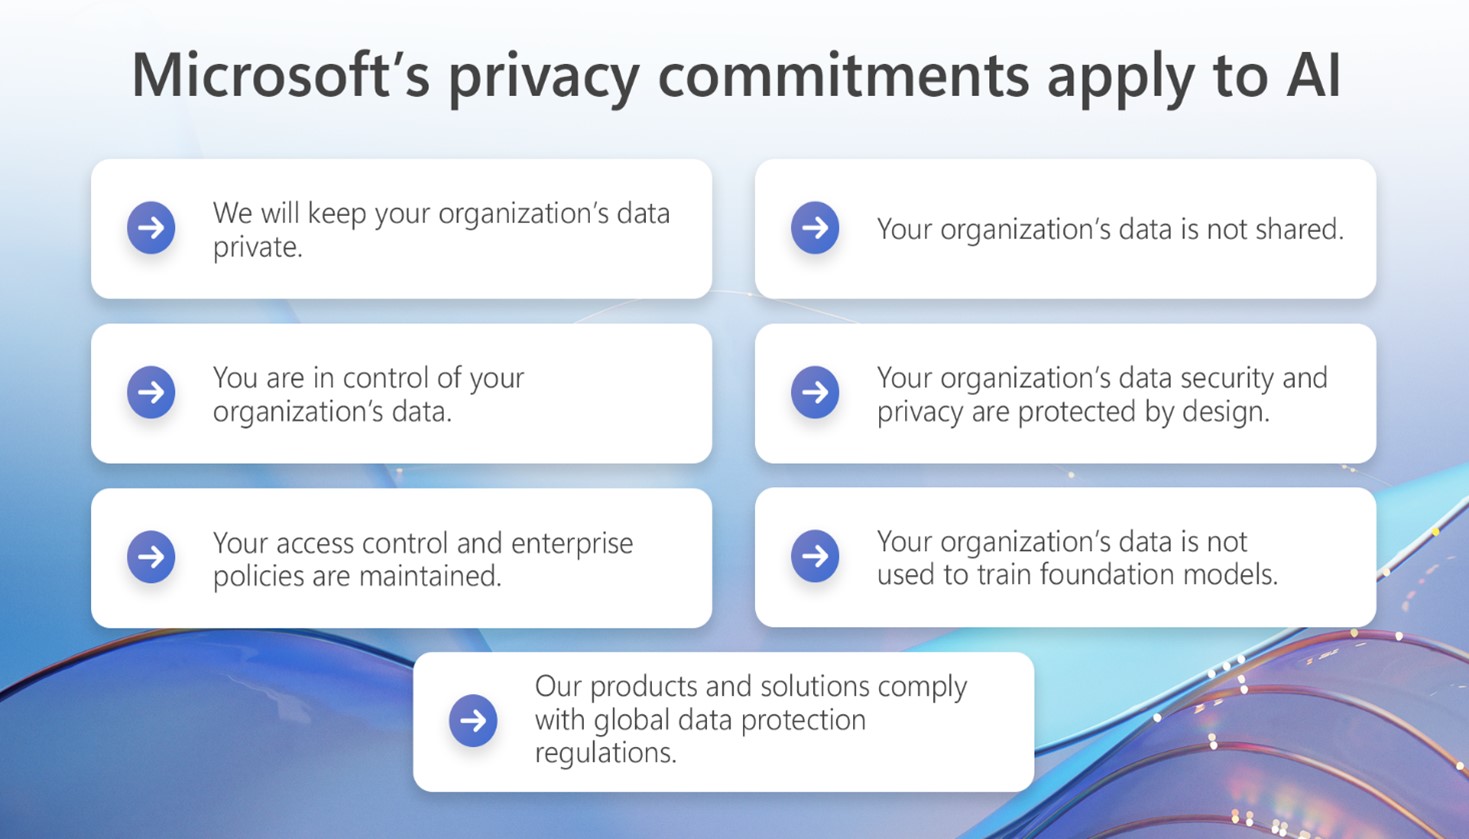 Microsoft's privacy commitments